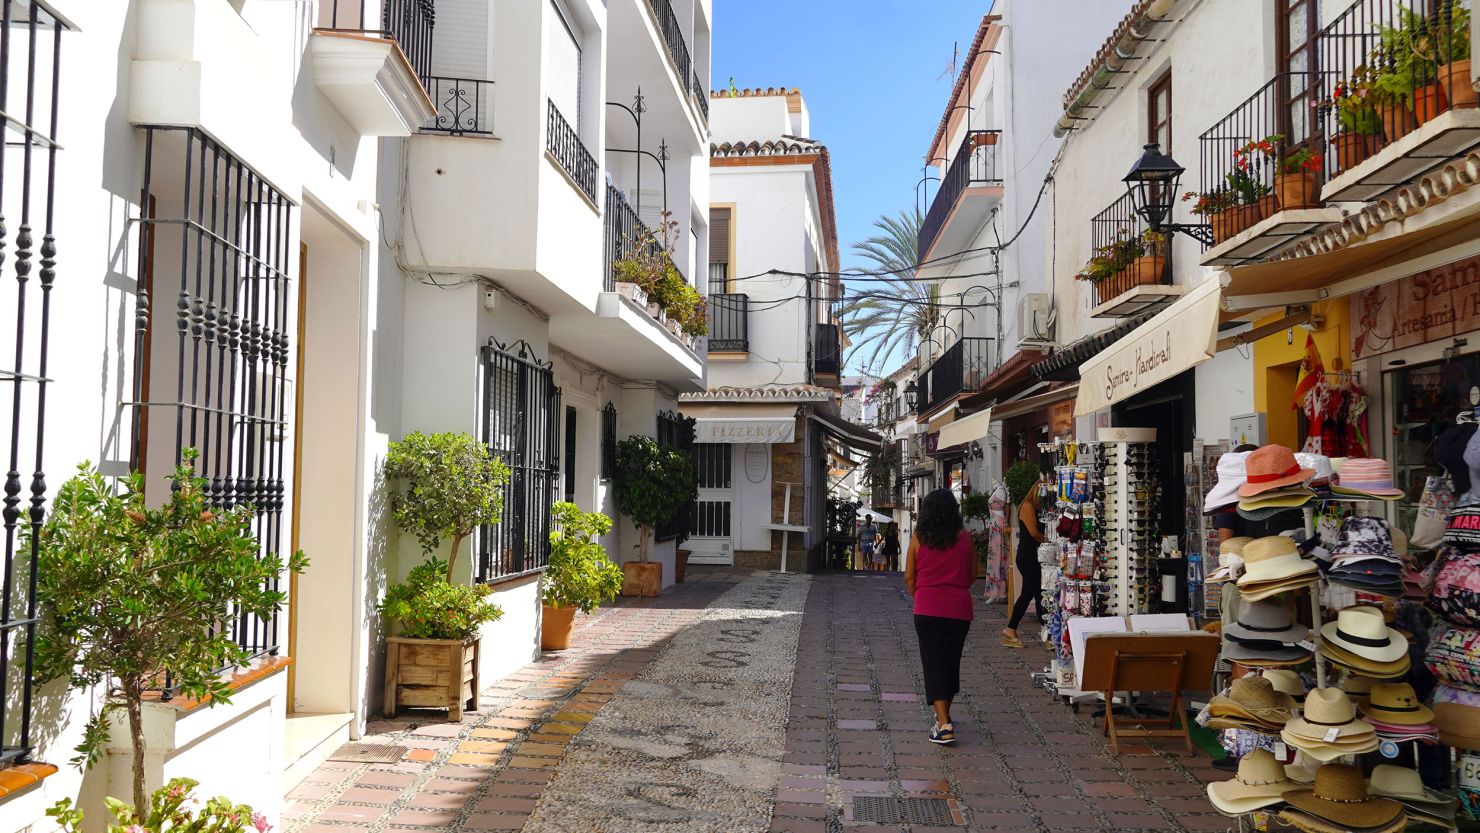 A woman walks through the Old Town of Marbella, Spain, far from Russia's war in Ukraine.